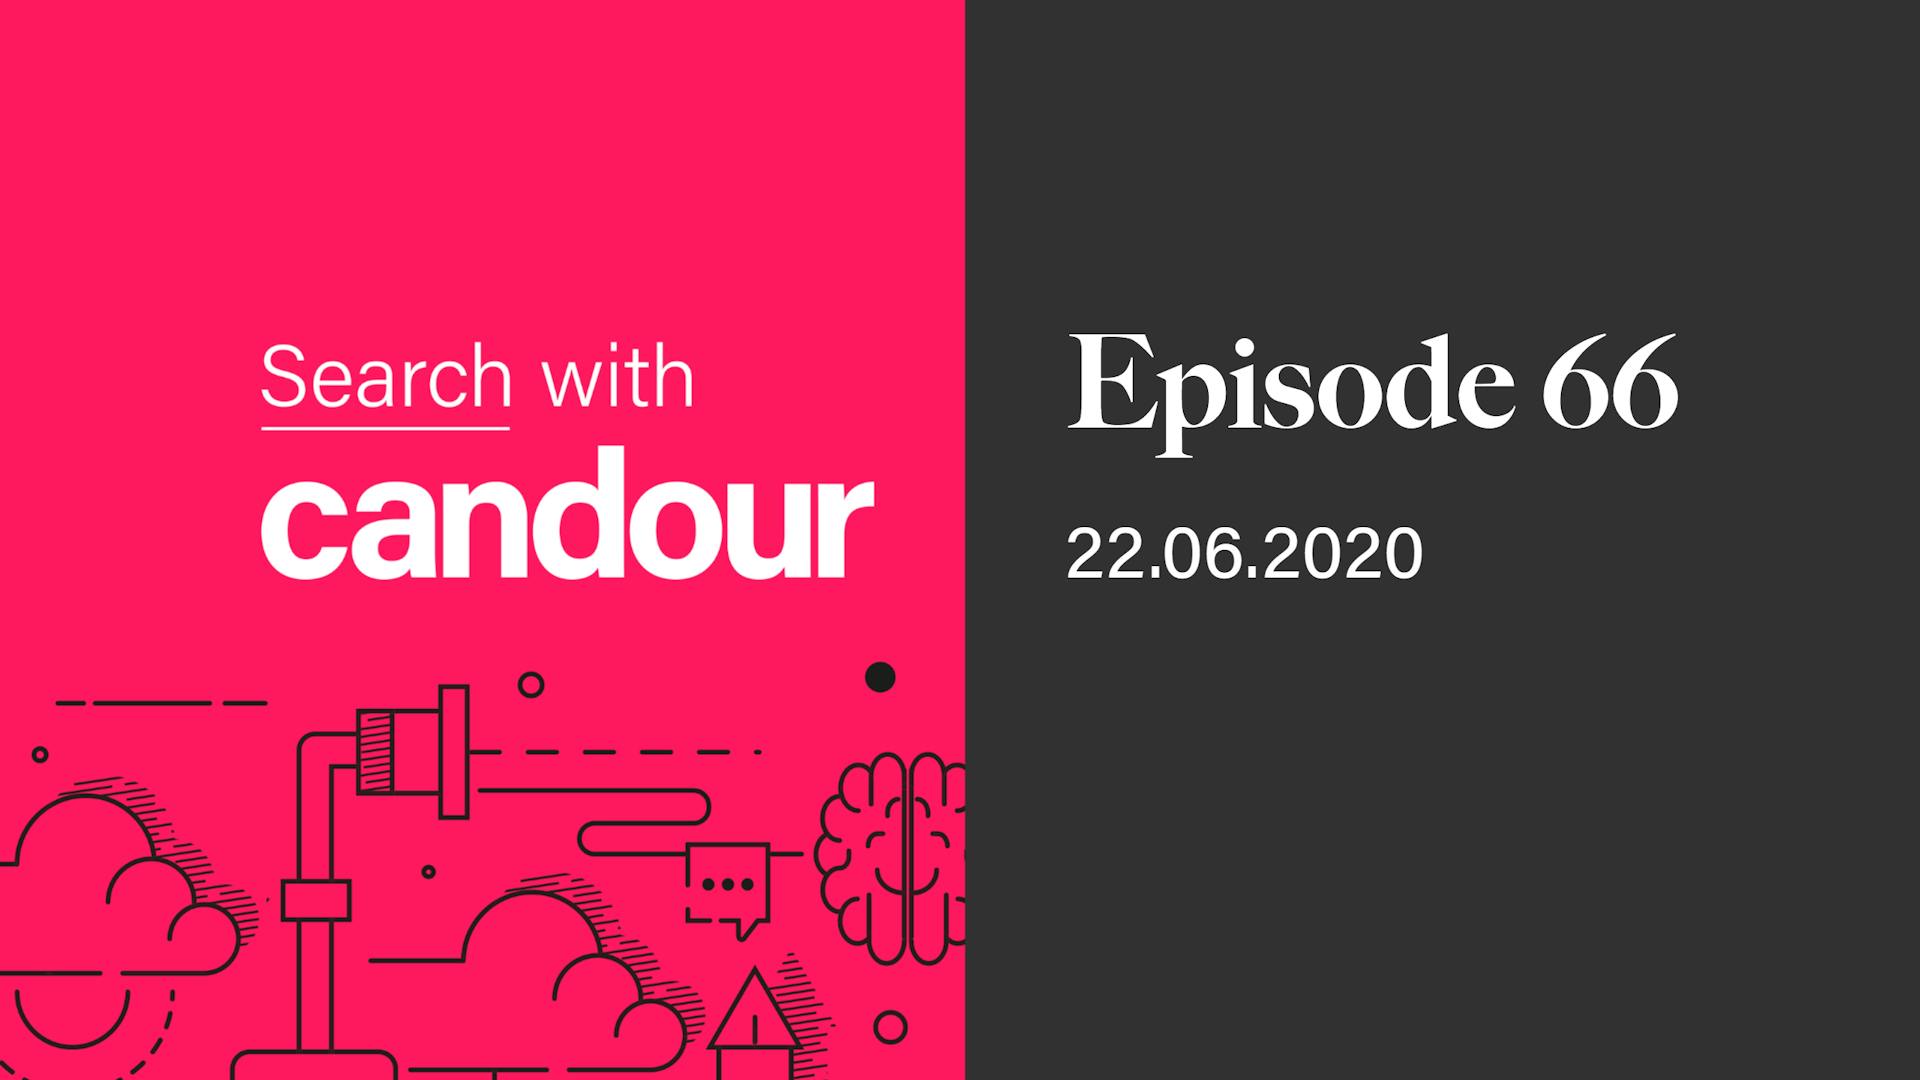 Episode 66 - Search with Candour